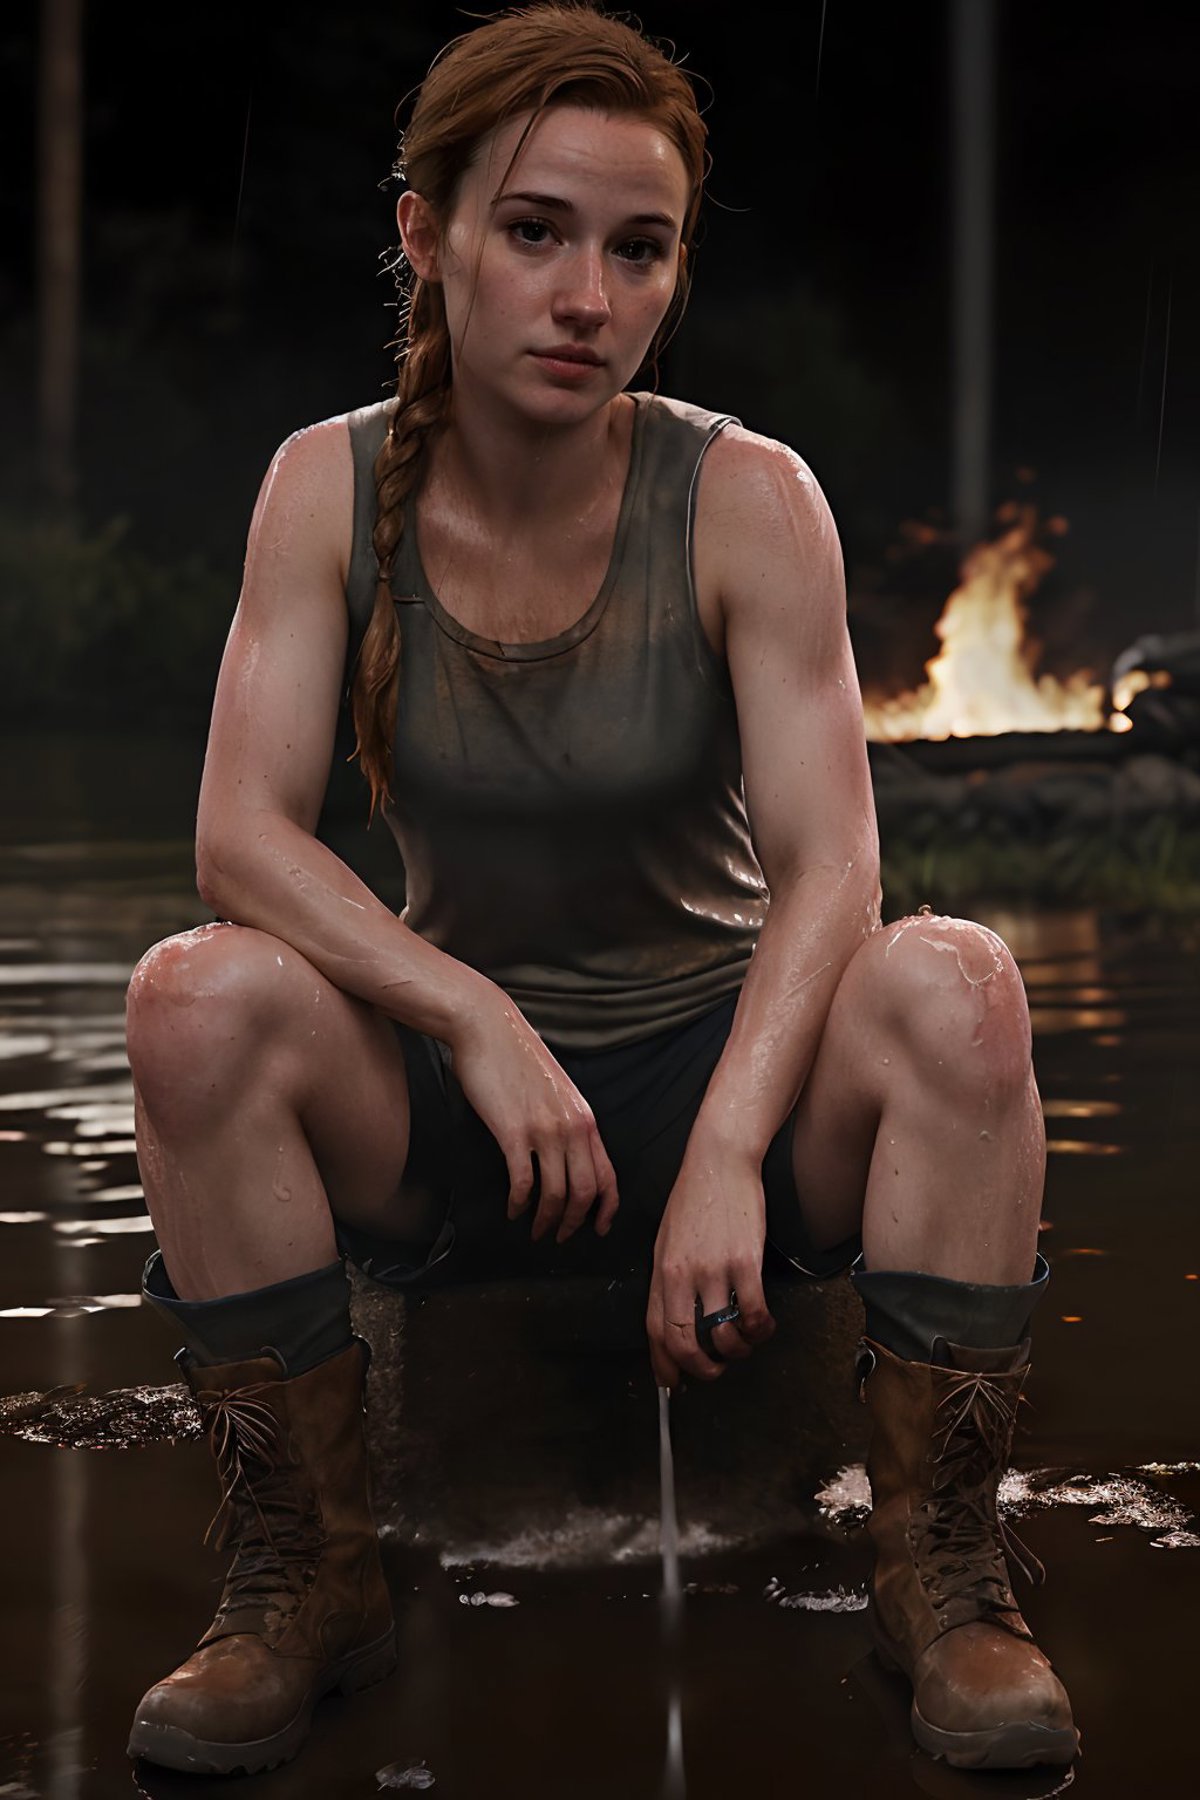 Abby from The Last of Us 2 image by SirDigsbey